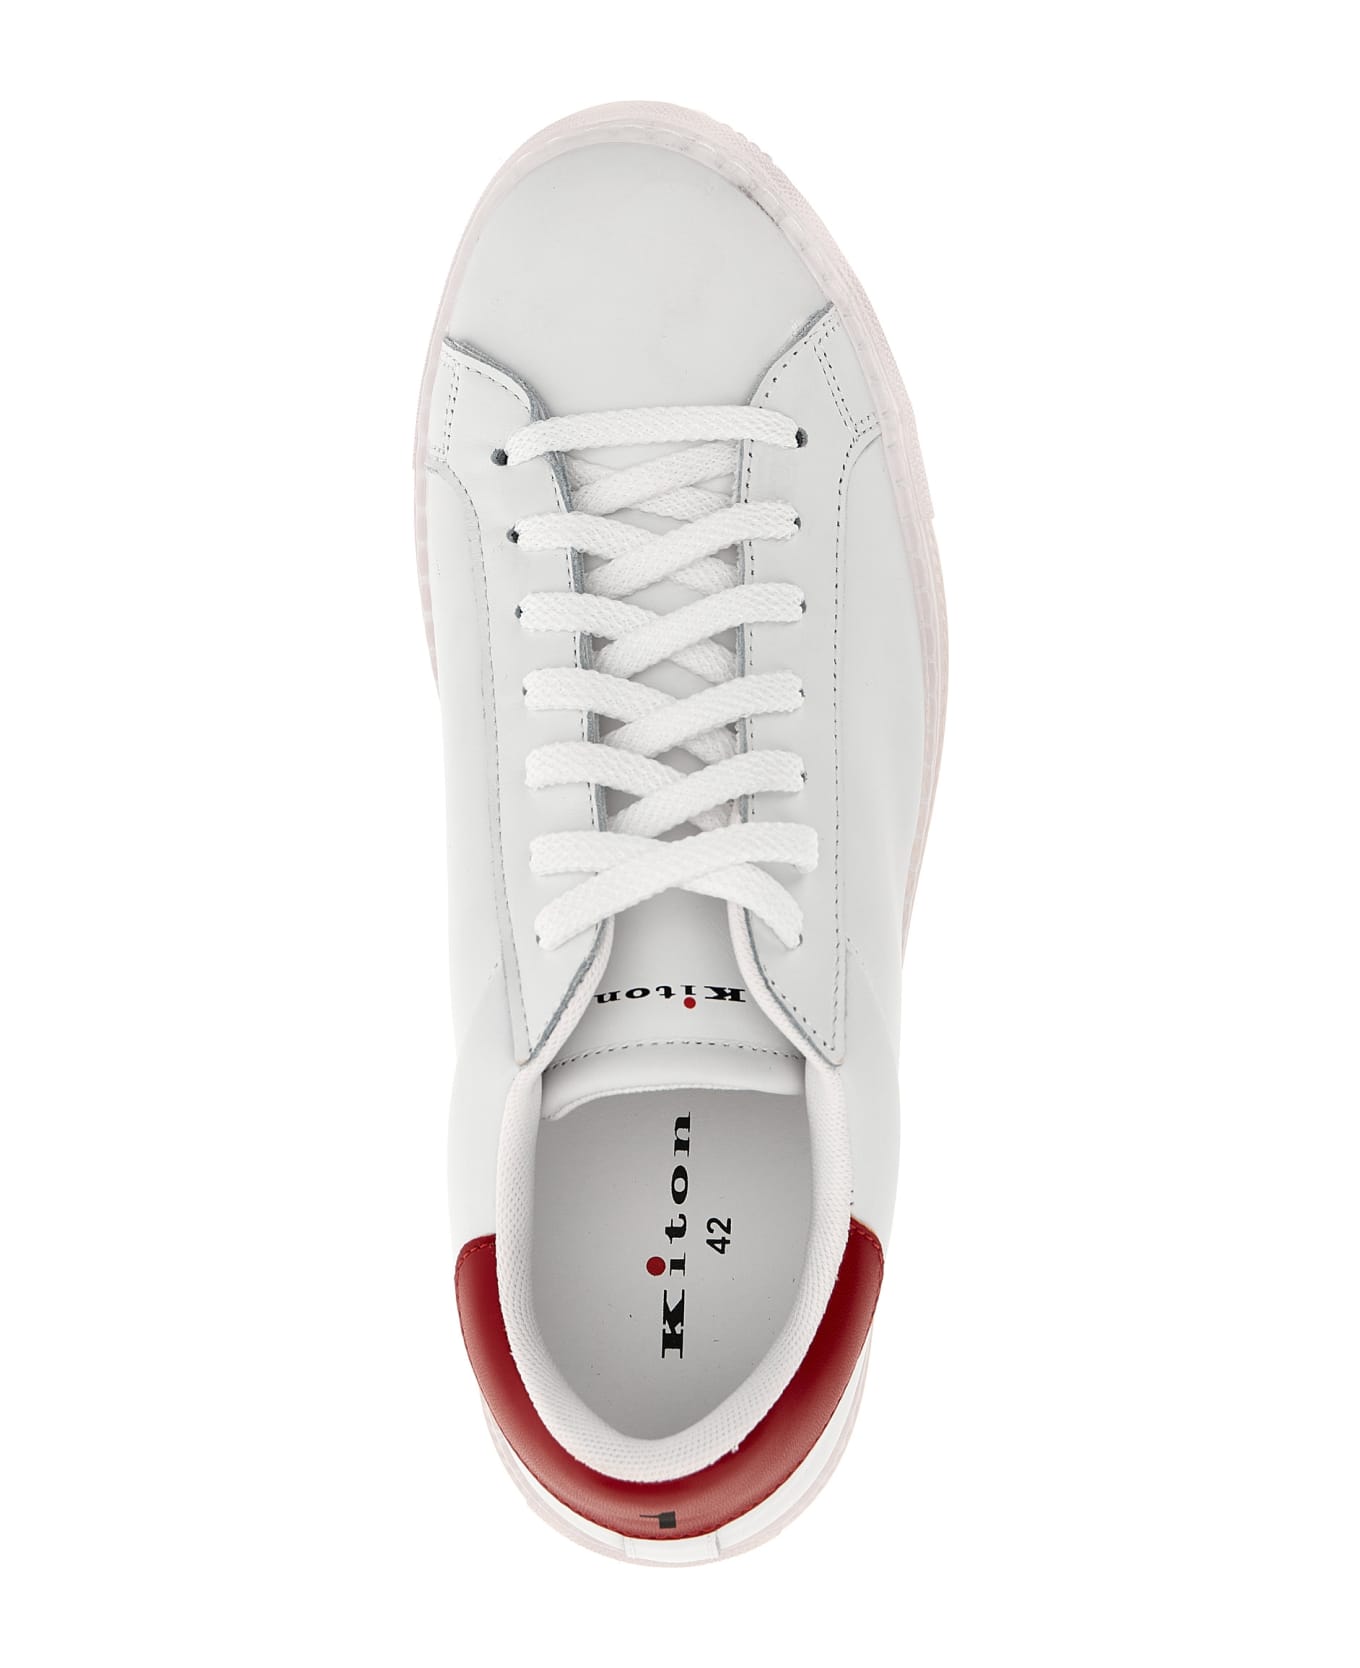 Kiton 'ussa088' Sneakers - Red